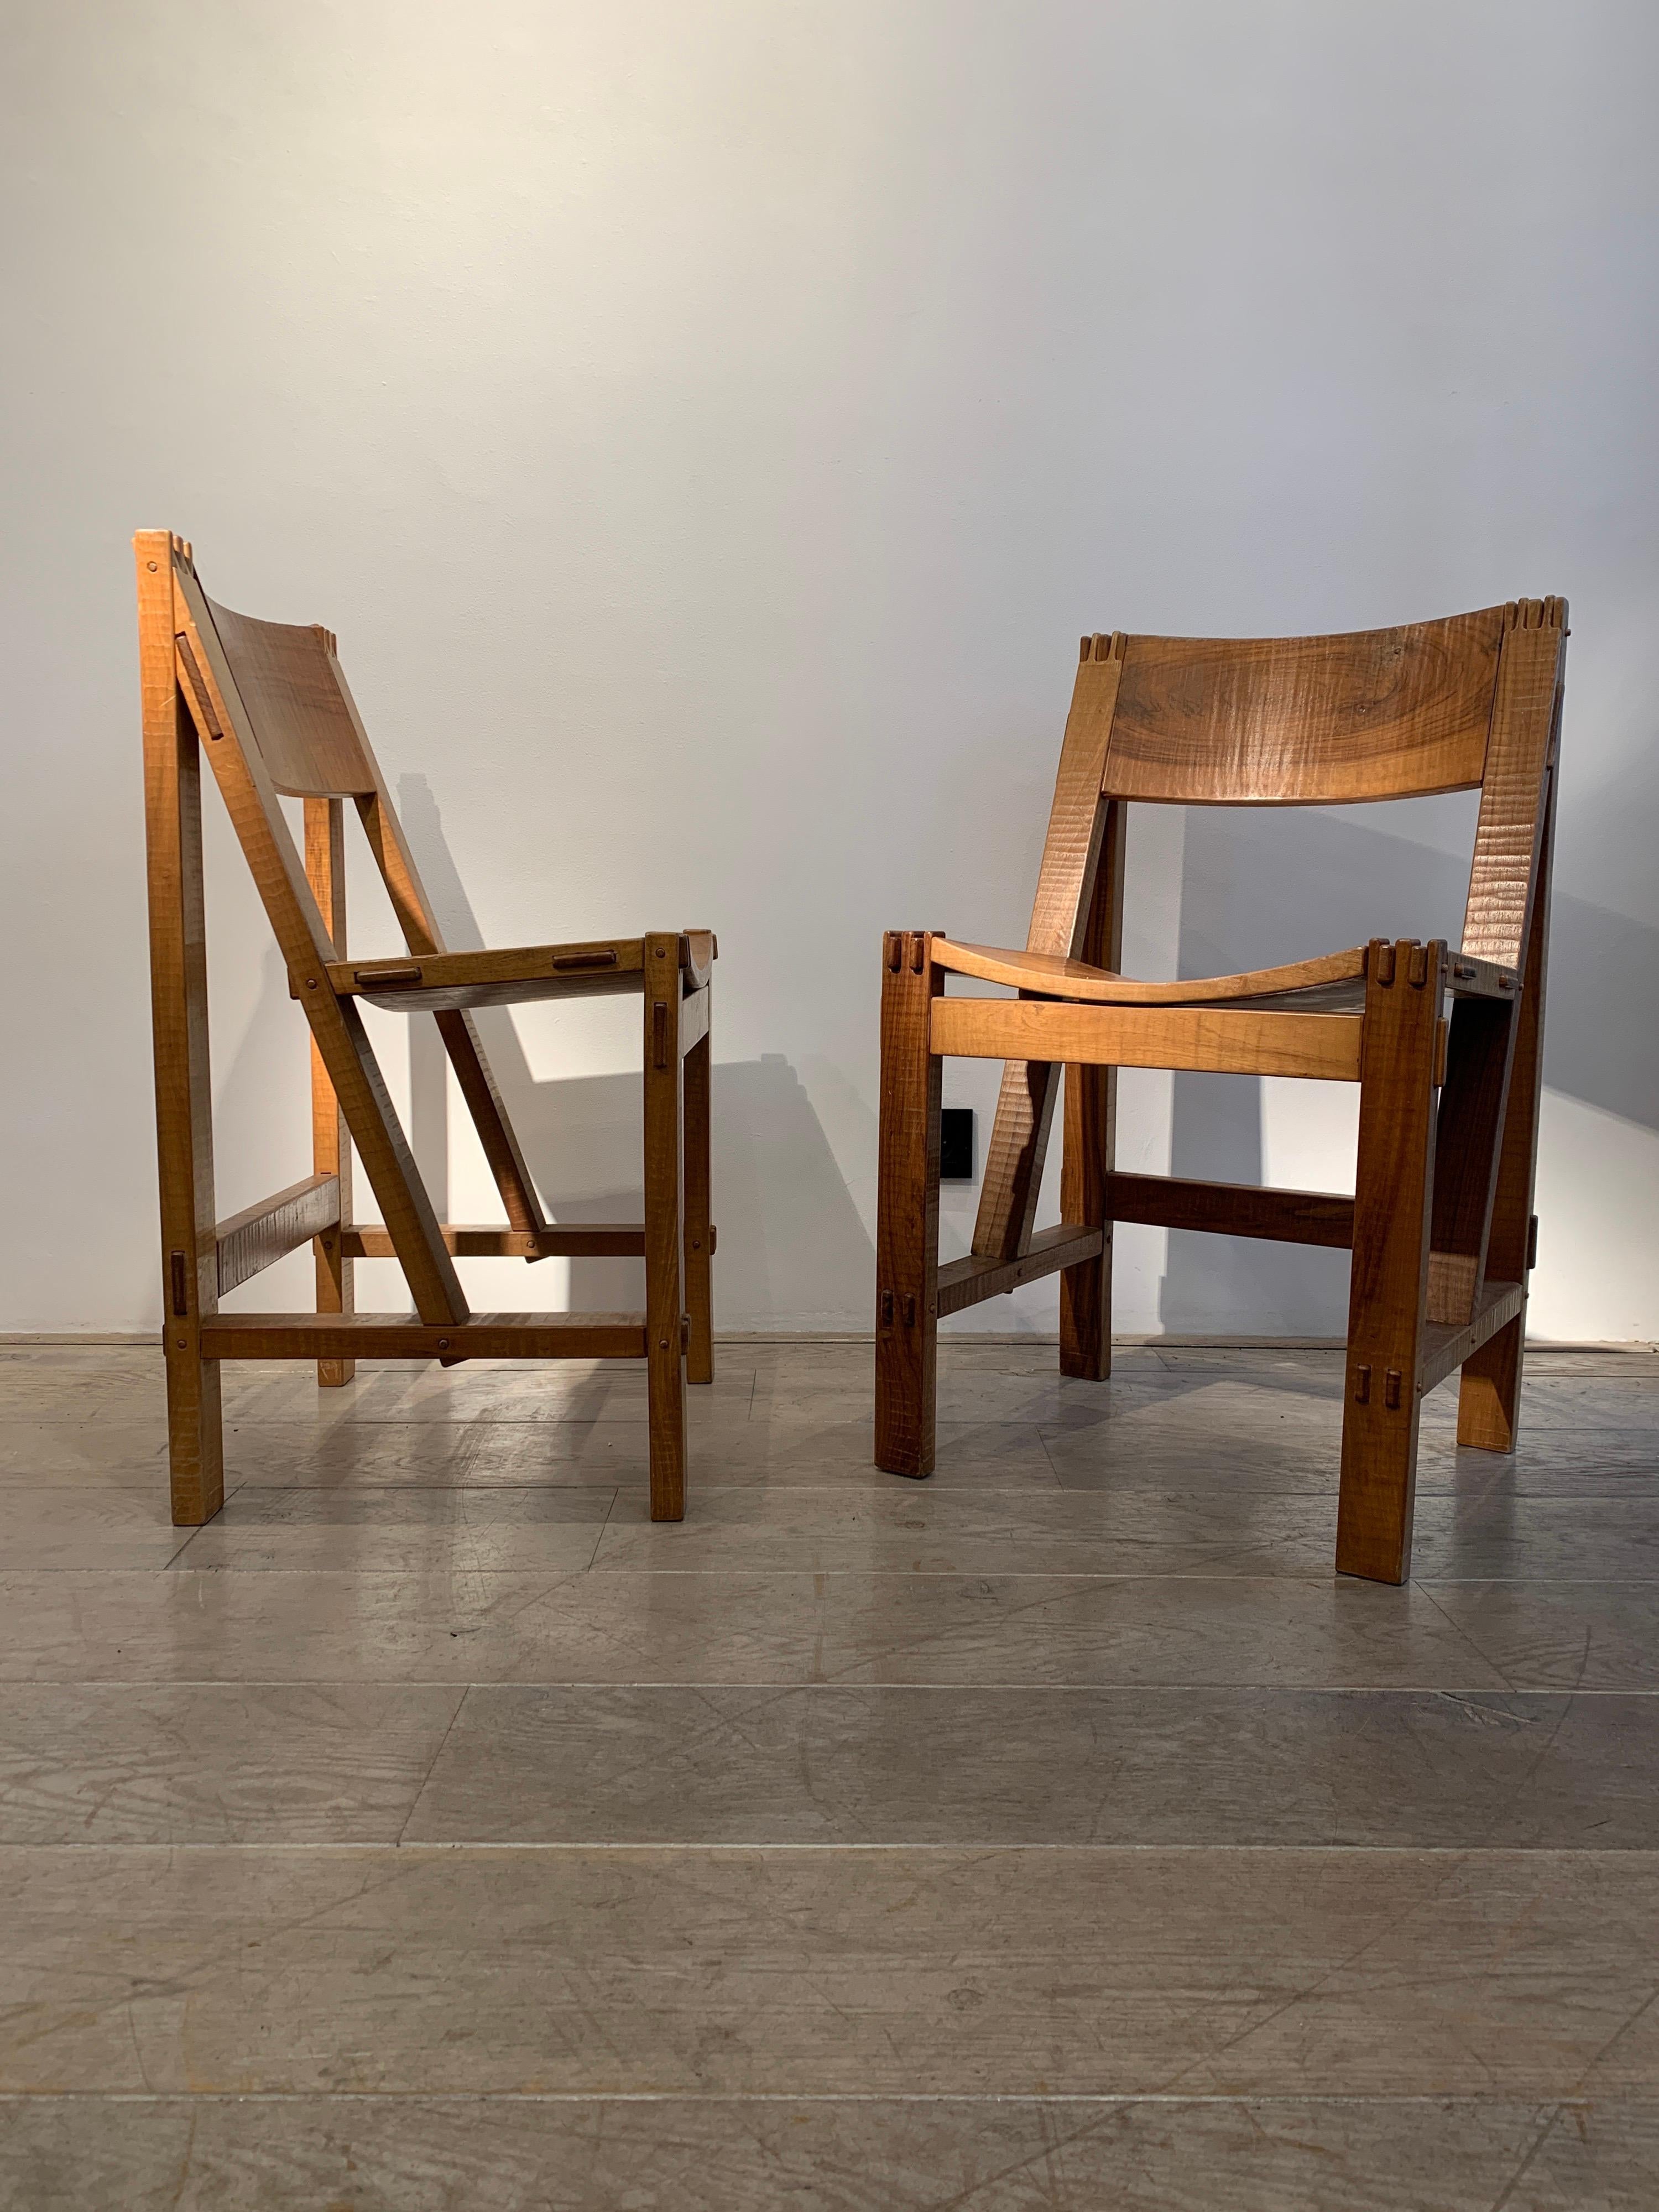 The pair is by Giuseppe Rivadossi. The model is known as the Regina chair. It was designed in 1962 and realized from 1968. The set dates circa 1968-1970s. It is totally handmade in Italian walnut. The architonic style creates emphasis on the